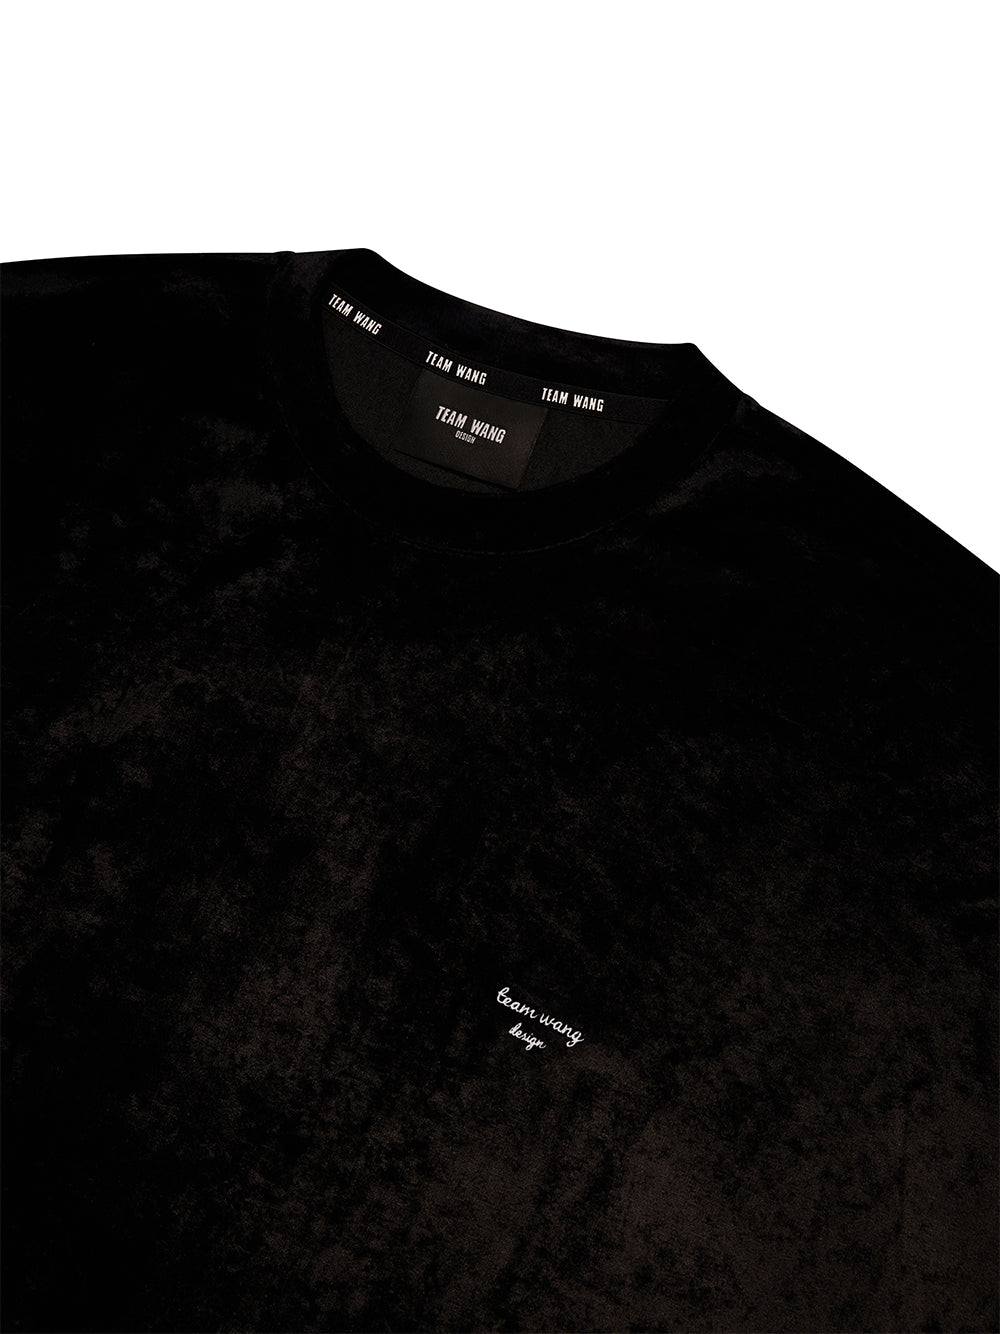 Team-Wang-Design-STAY-FOR-THE-NIGHT-Extra-Oversized-T-Shirt-Black-3